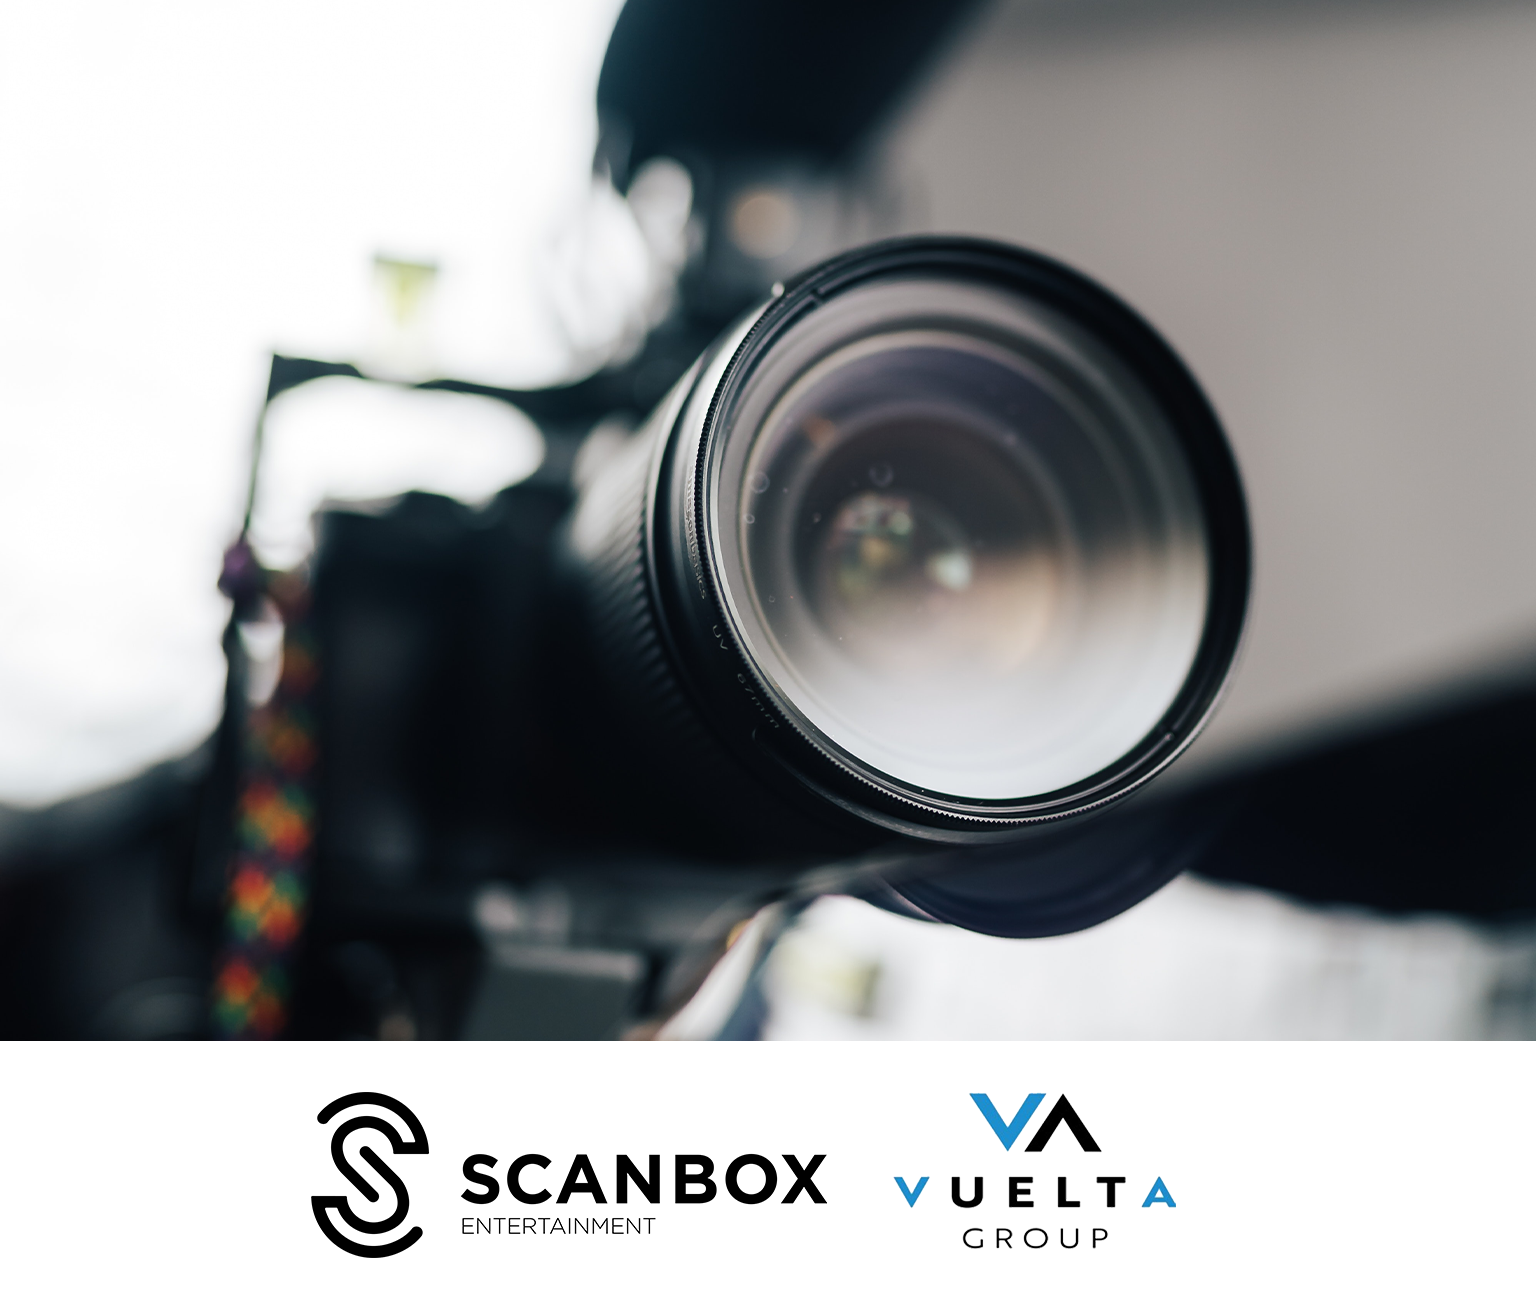 Advisor to Scanbox Entertainment Group in the sale to Vuelta Group